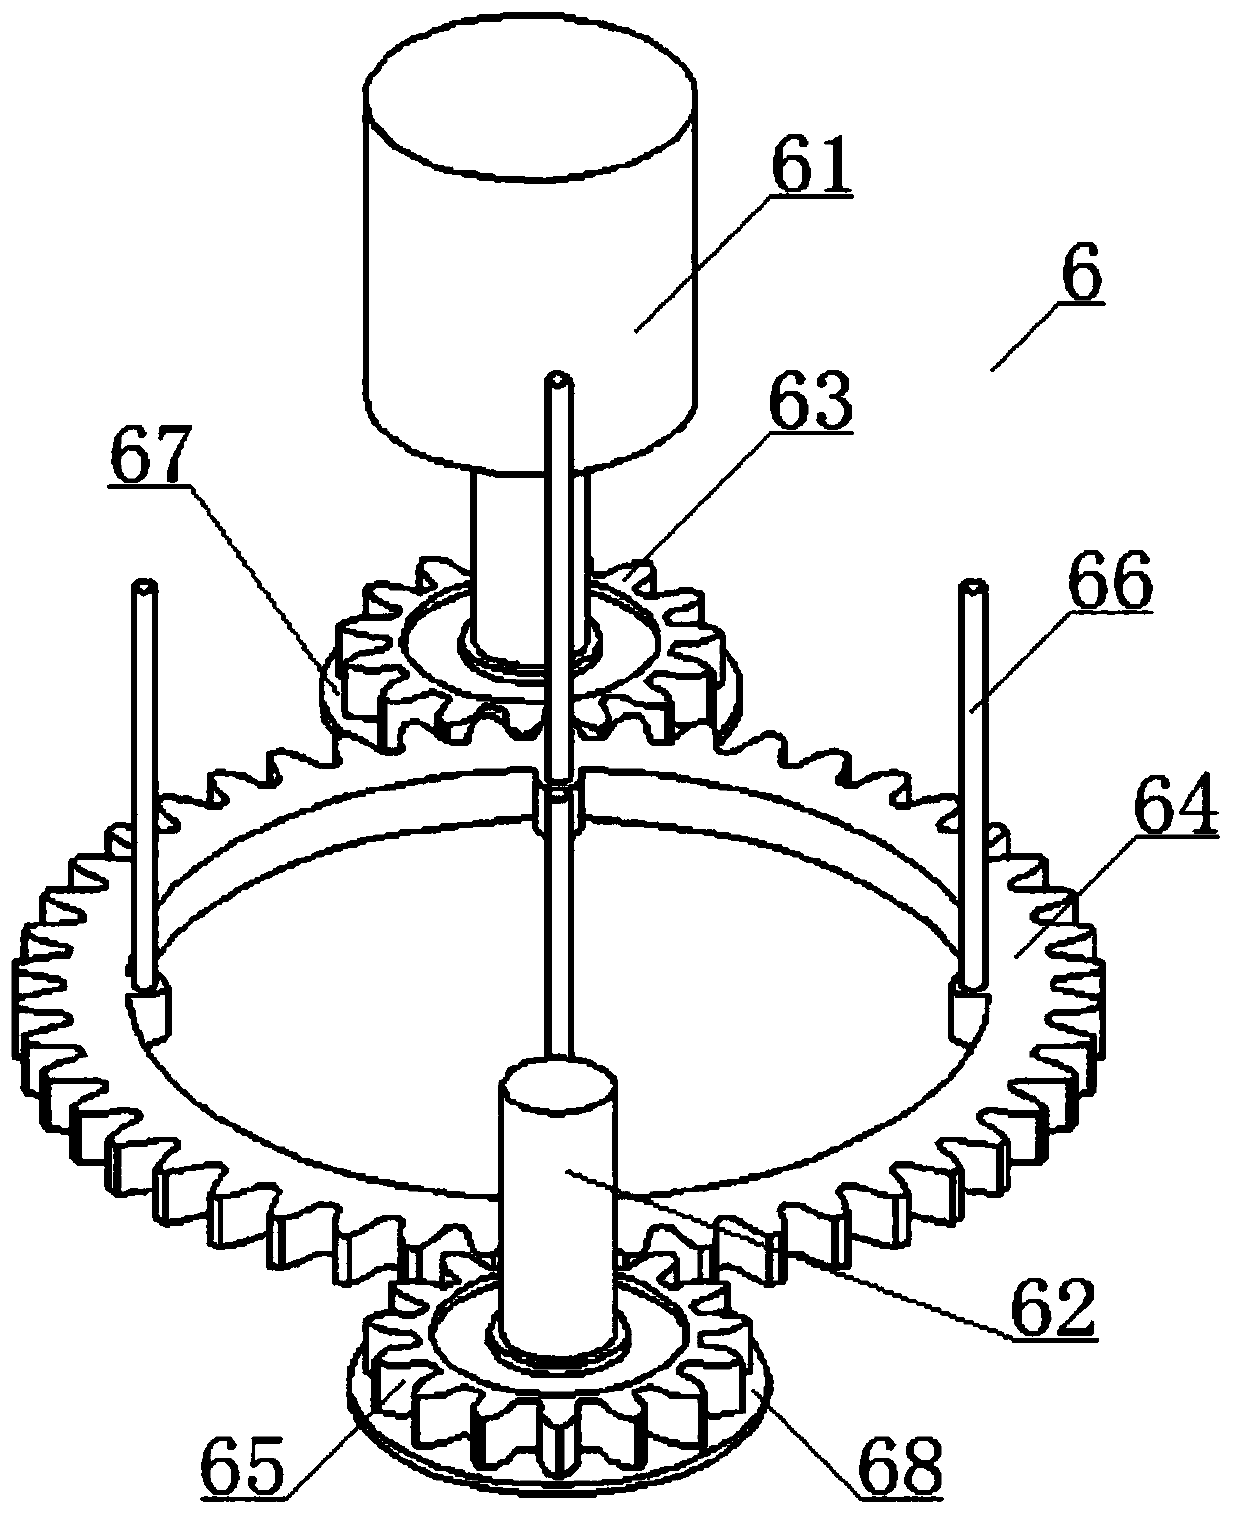 A variable compression ratio piston and a variable compression ratio engine